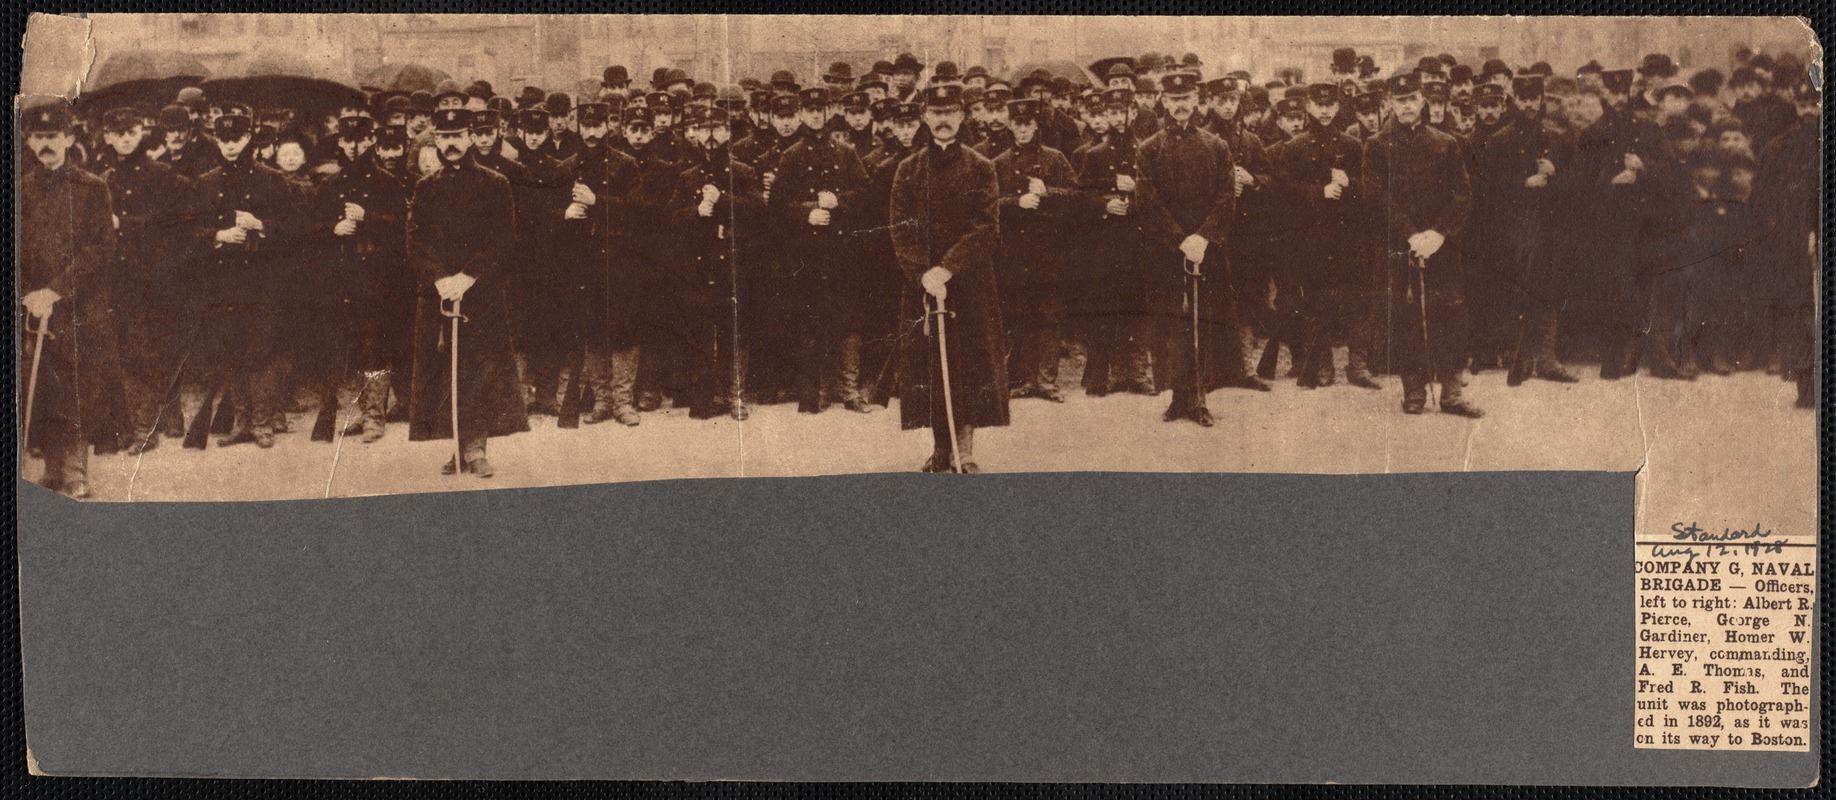 Members of Company G, Naval Brigade, photographed on way to Boston in 1892